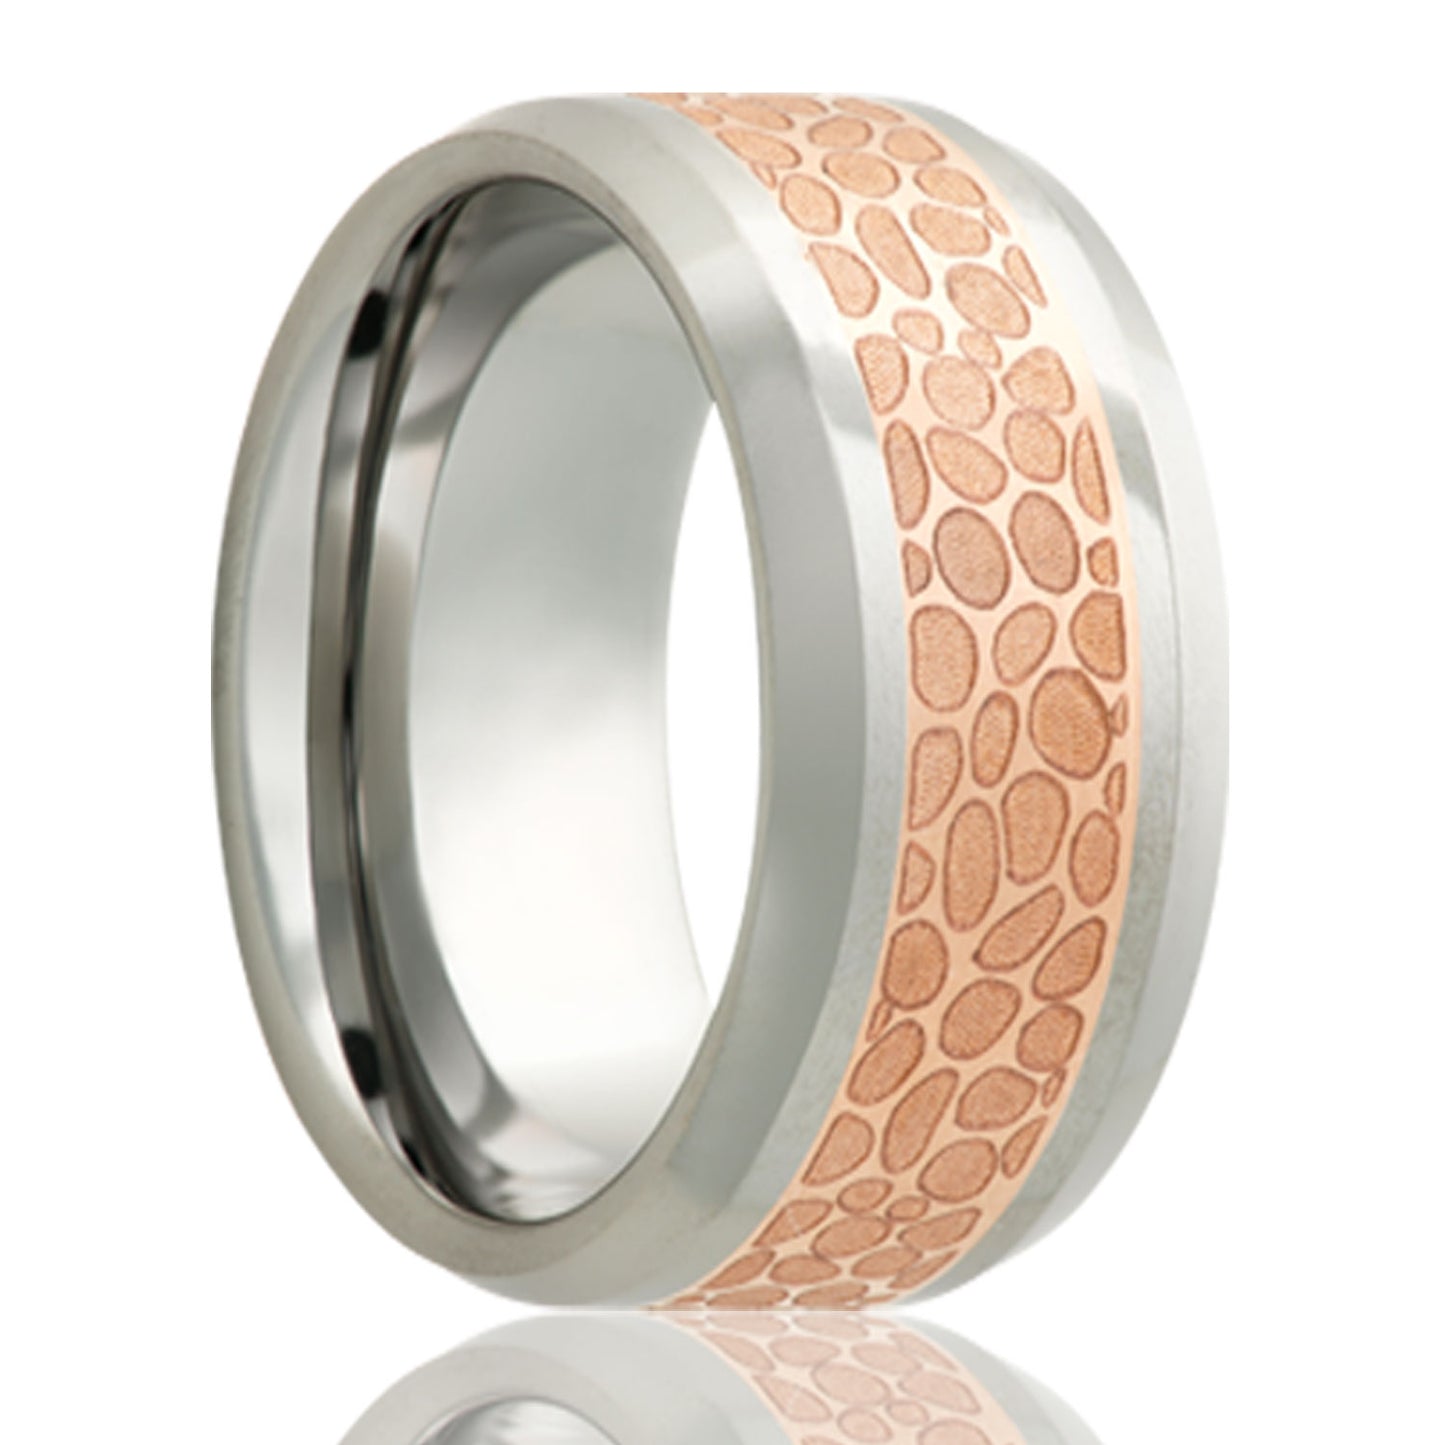 A copper inlay cobalt men's wedding band with beveled edges displayed on a neutral white background.